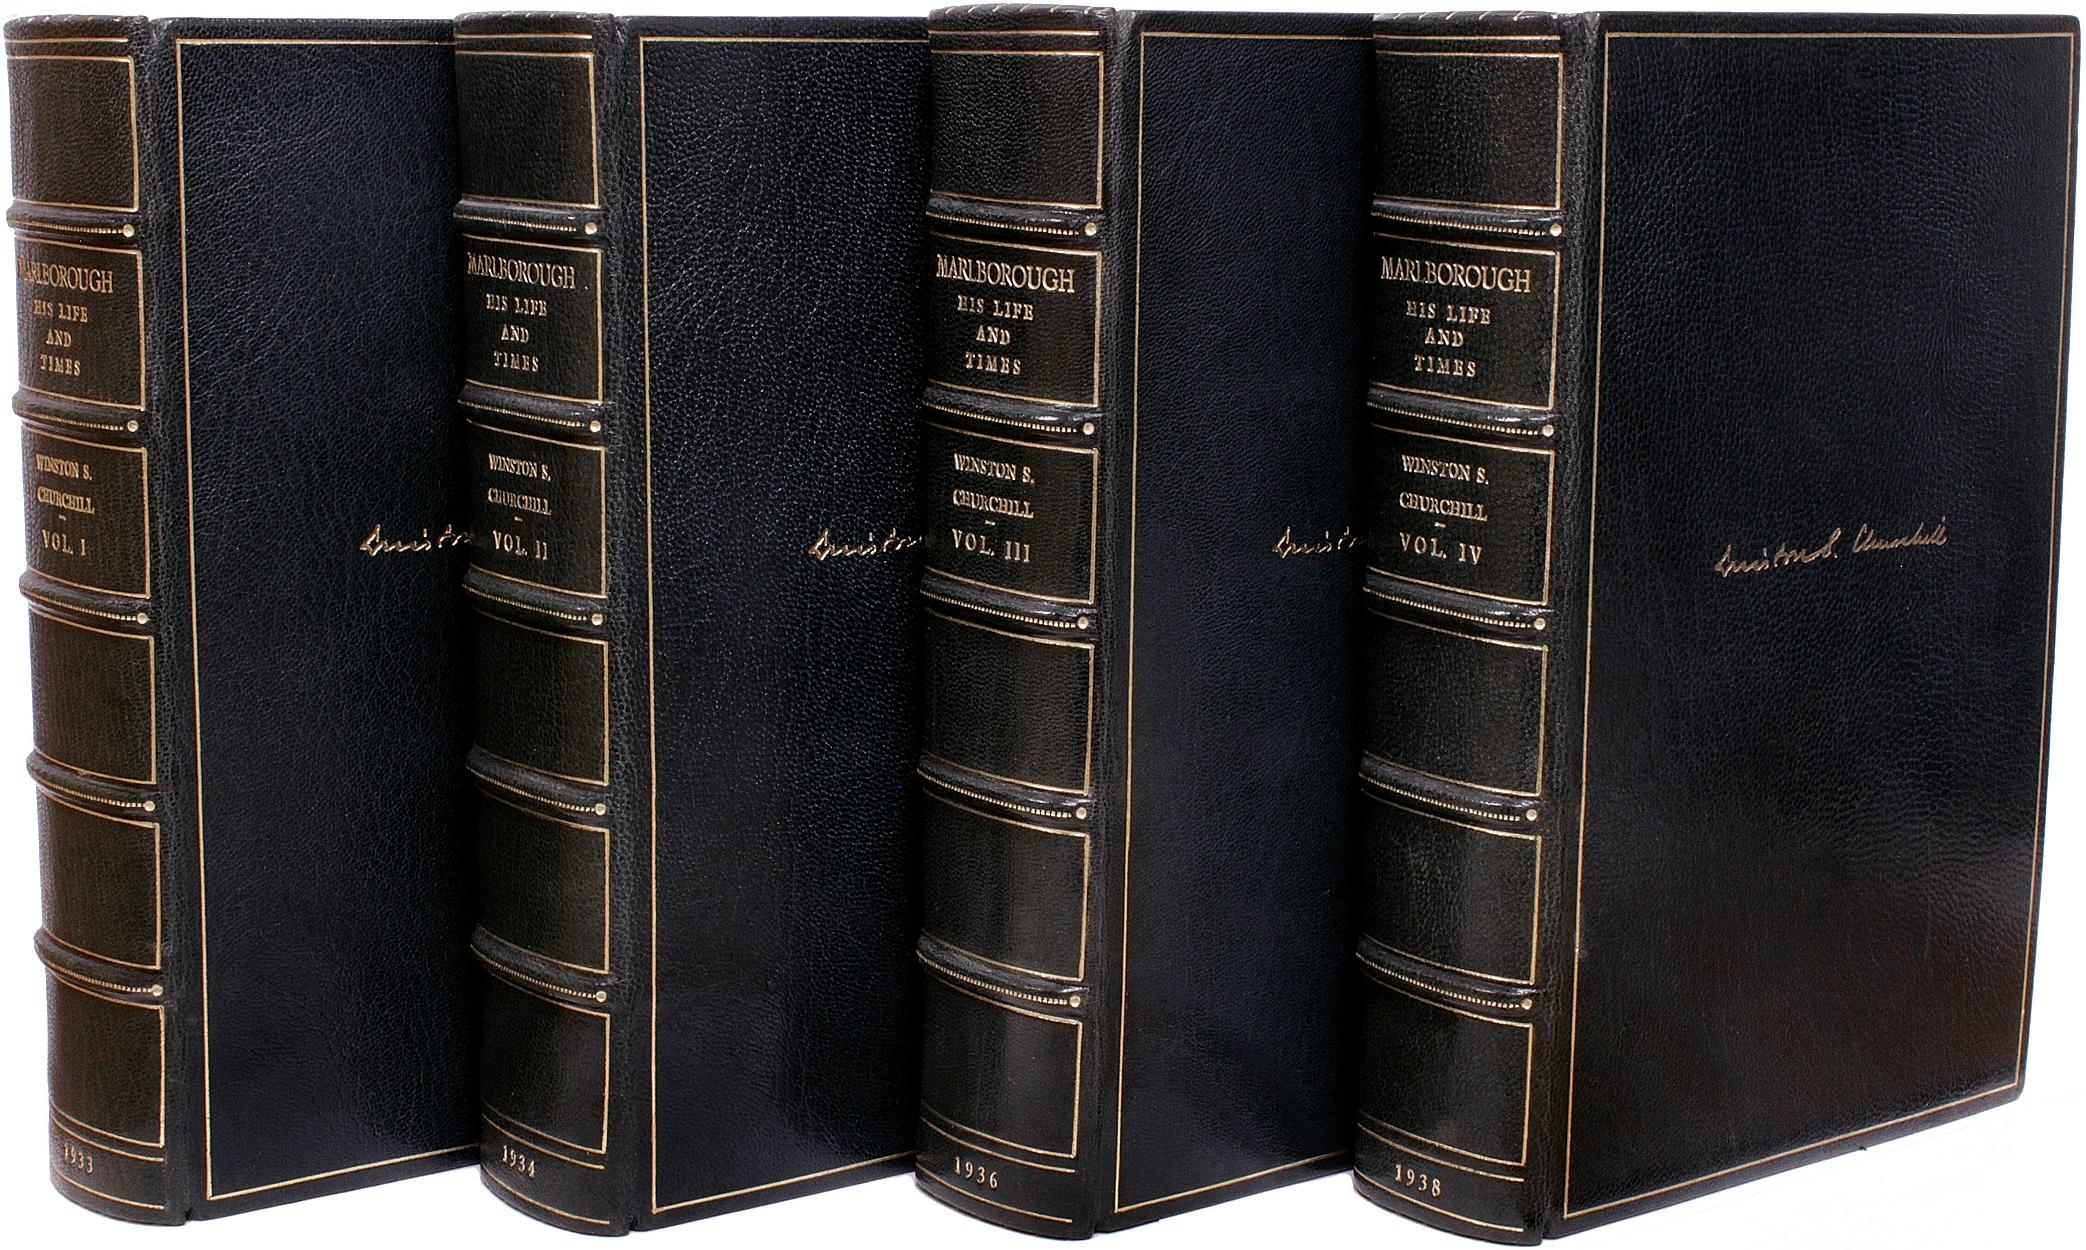 AUTHOR: CHURCHILL, Winston S. 

TITLE: Marlborough His Life and Times.

PUBLISHER: London: George G. Harrap, 1933, 34, 36, 38.

DESCRIPTION: ALL FIRST EDITIONS. 4 vols., 9